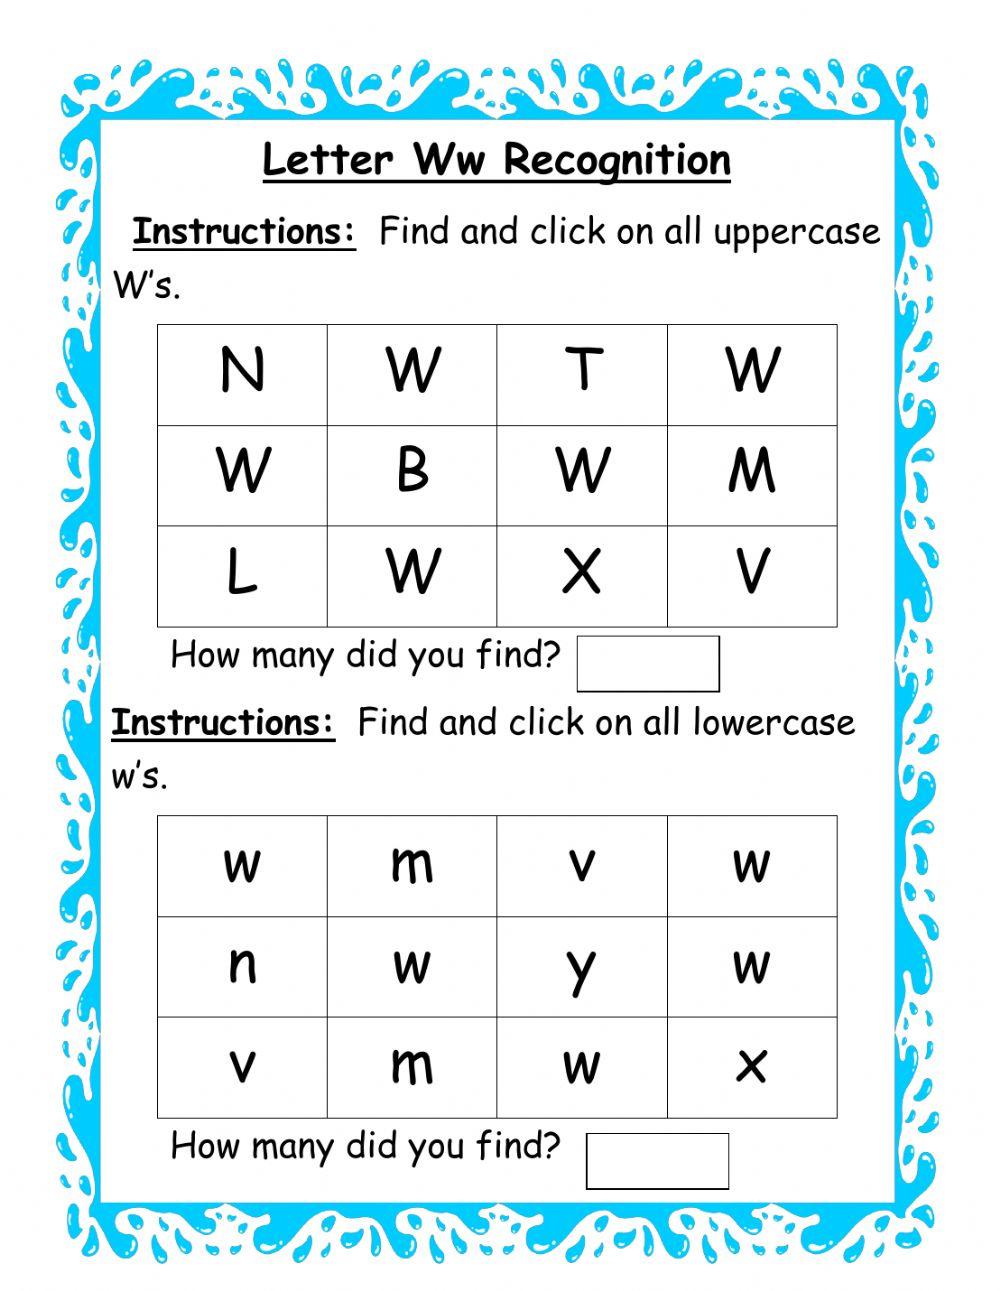 Letter Ww Recognition